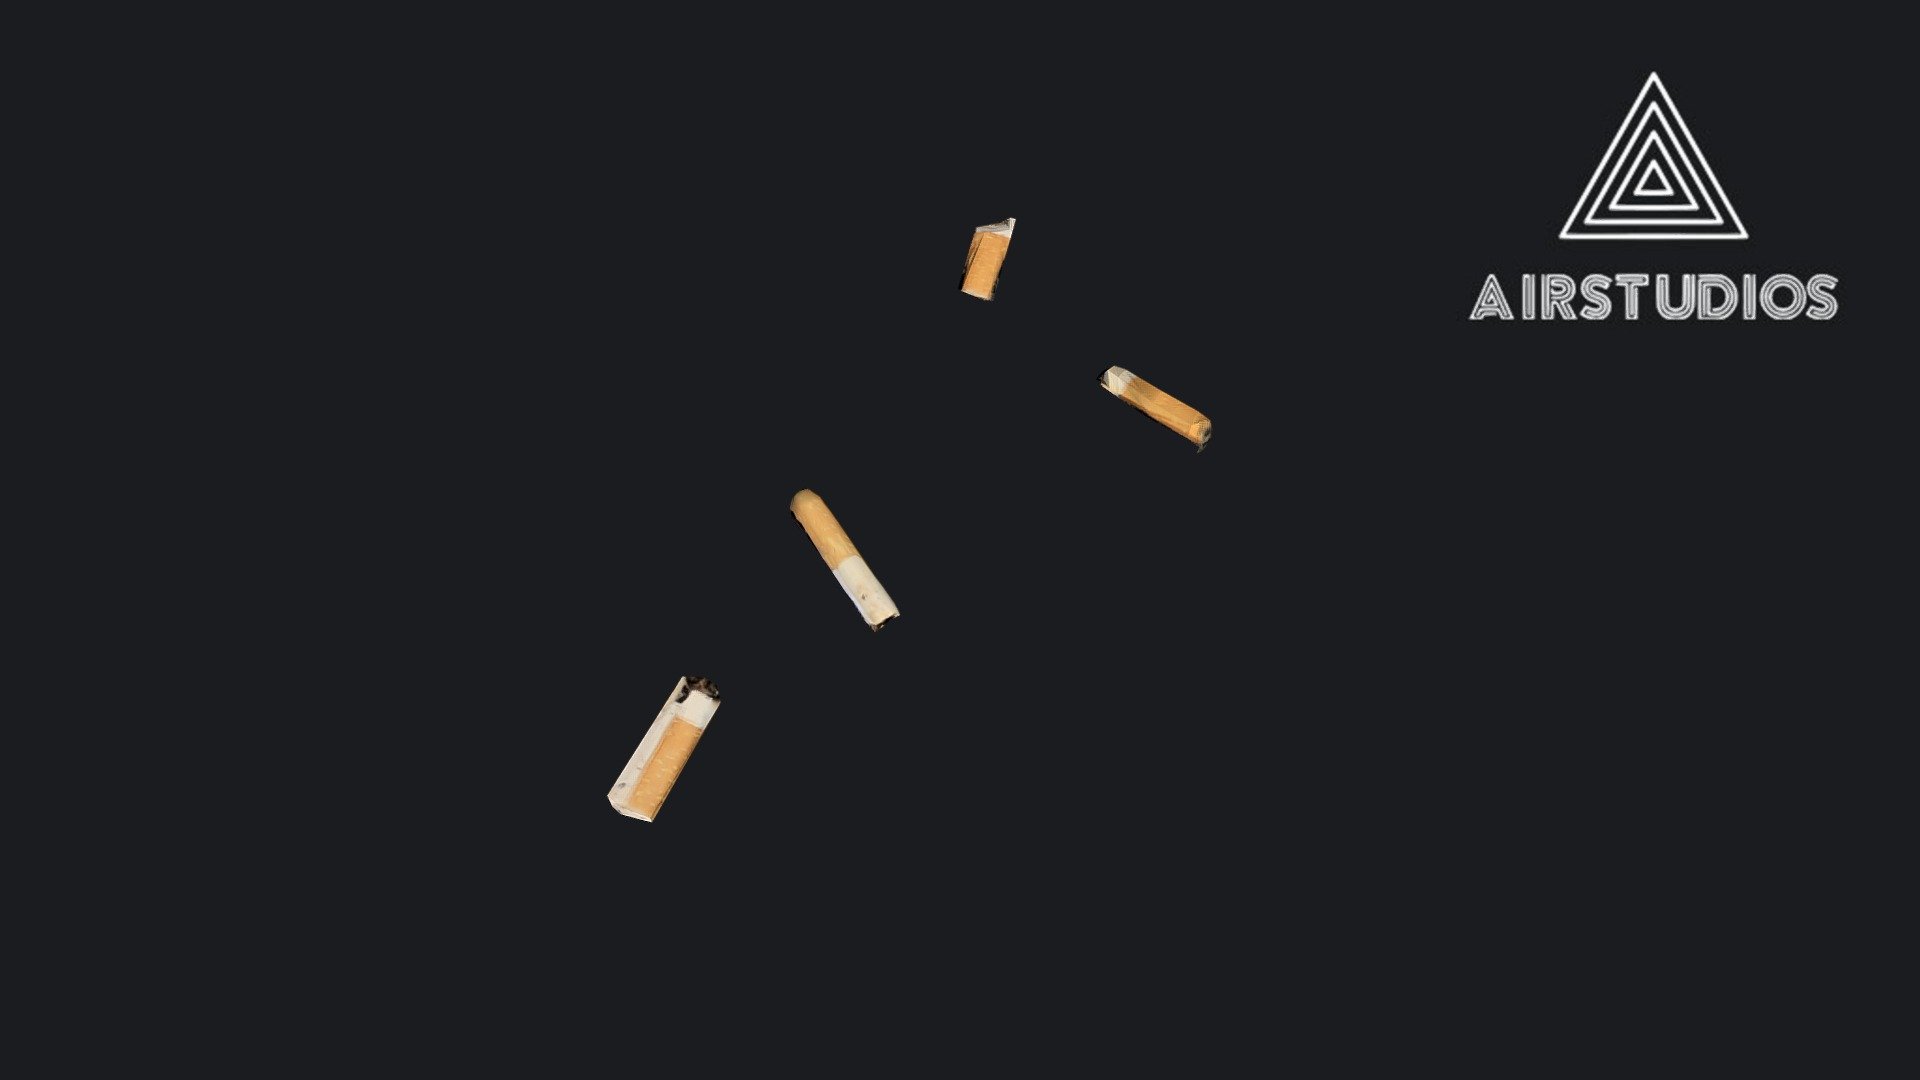 Street Trash Cigarettes (Photoscan Low Poly) 
Made in Maya And Reality Capture - Street Trash Cigarettes (Photoscan Low Poly) - Buy Royalty Free 3D model by AirStudios (@sebbe613) 3d model